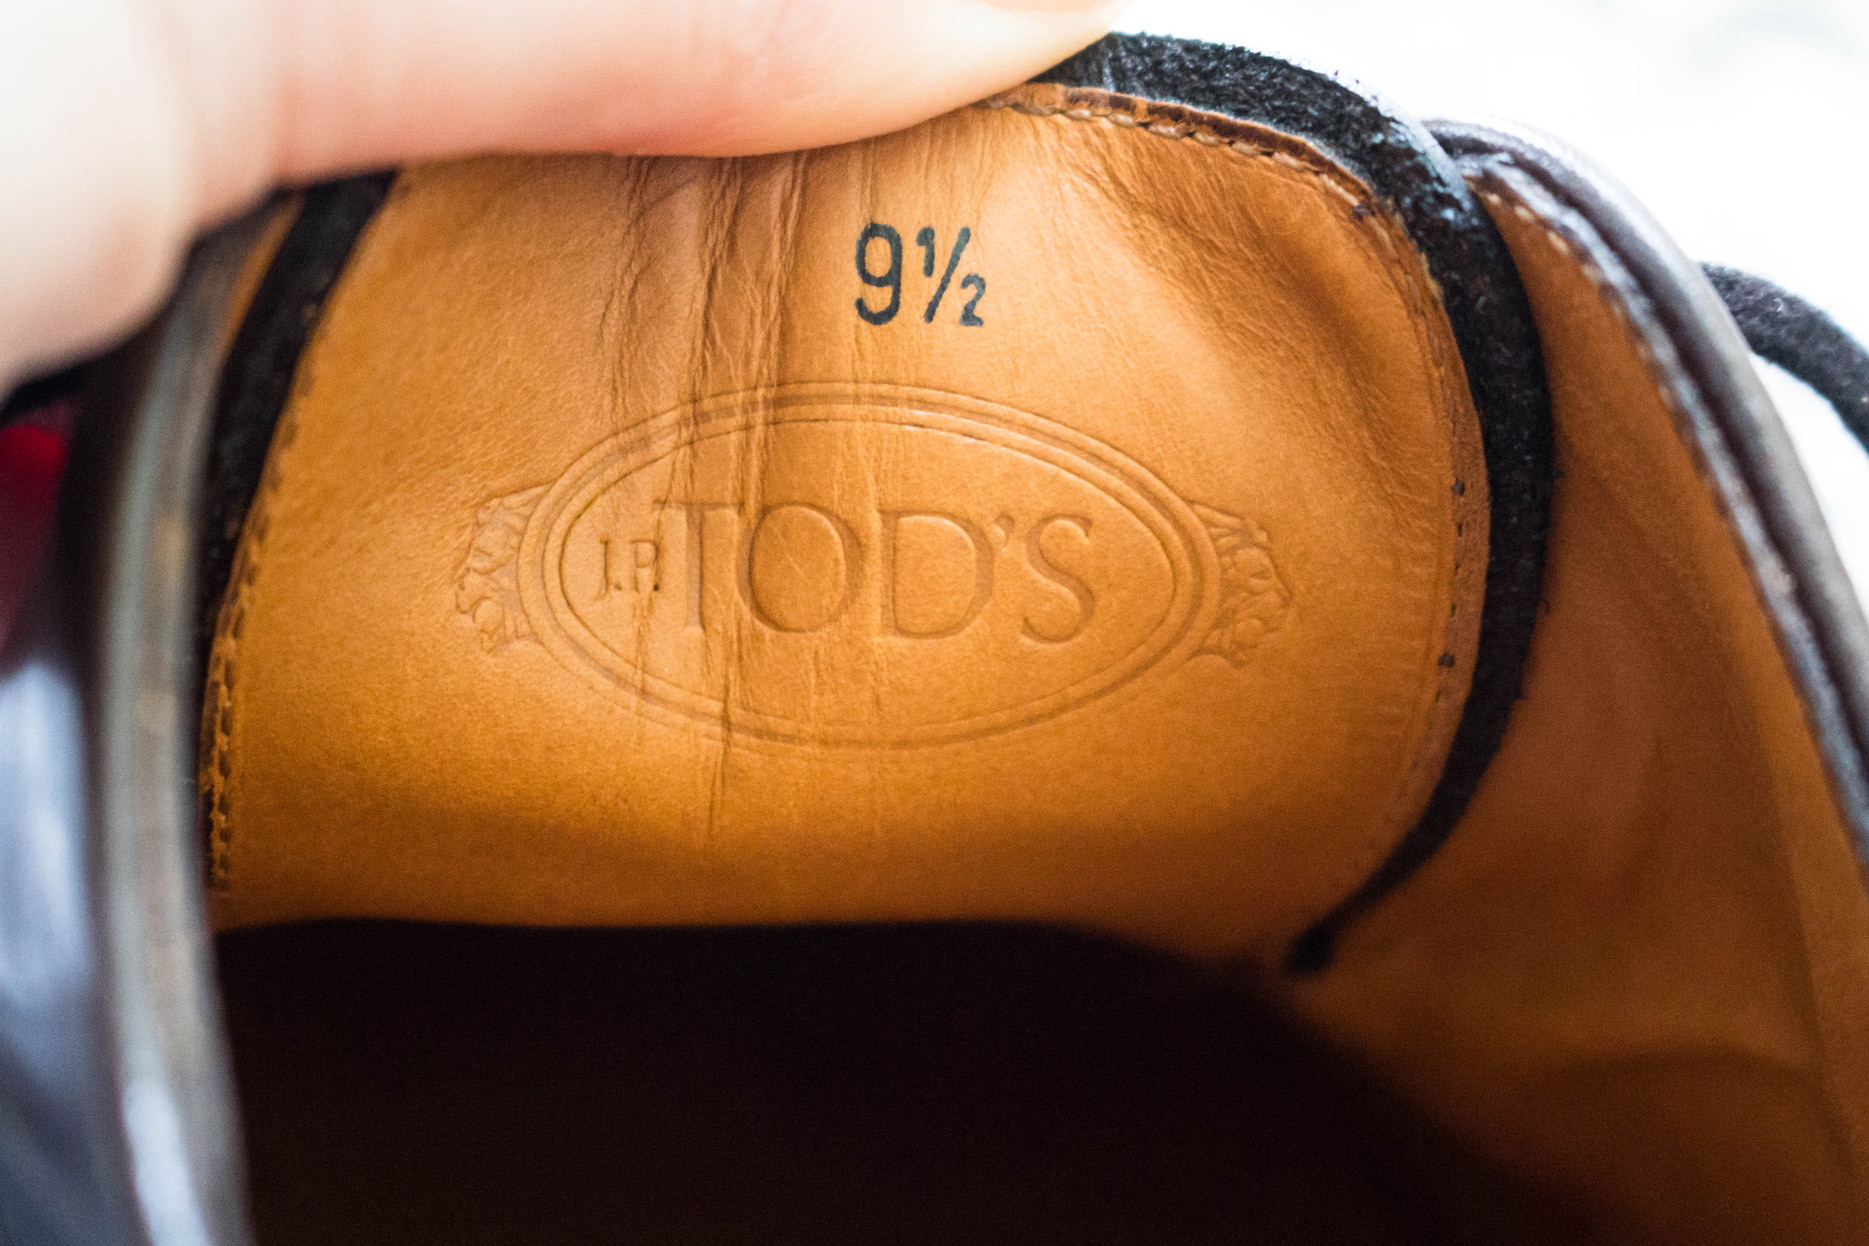 Authenticating and Finding Tod's Shoes